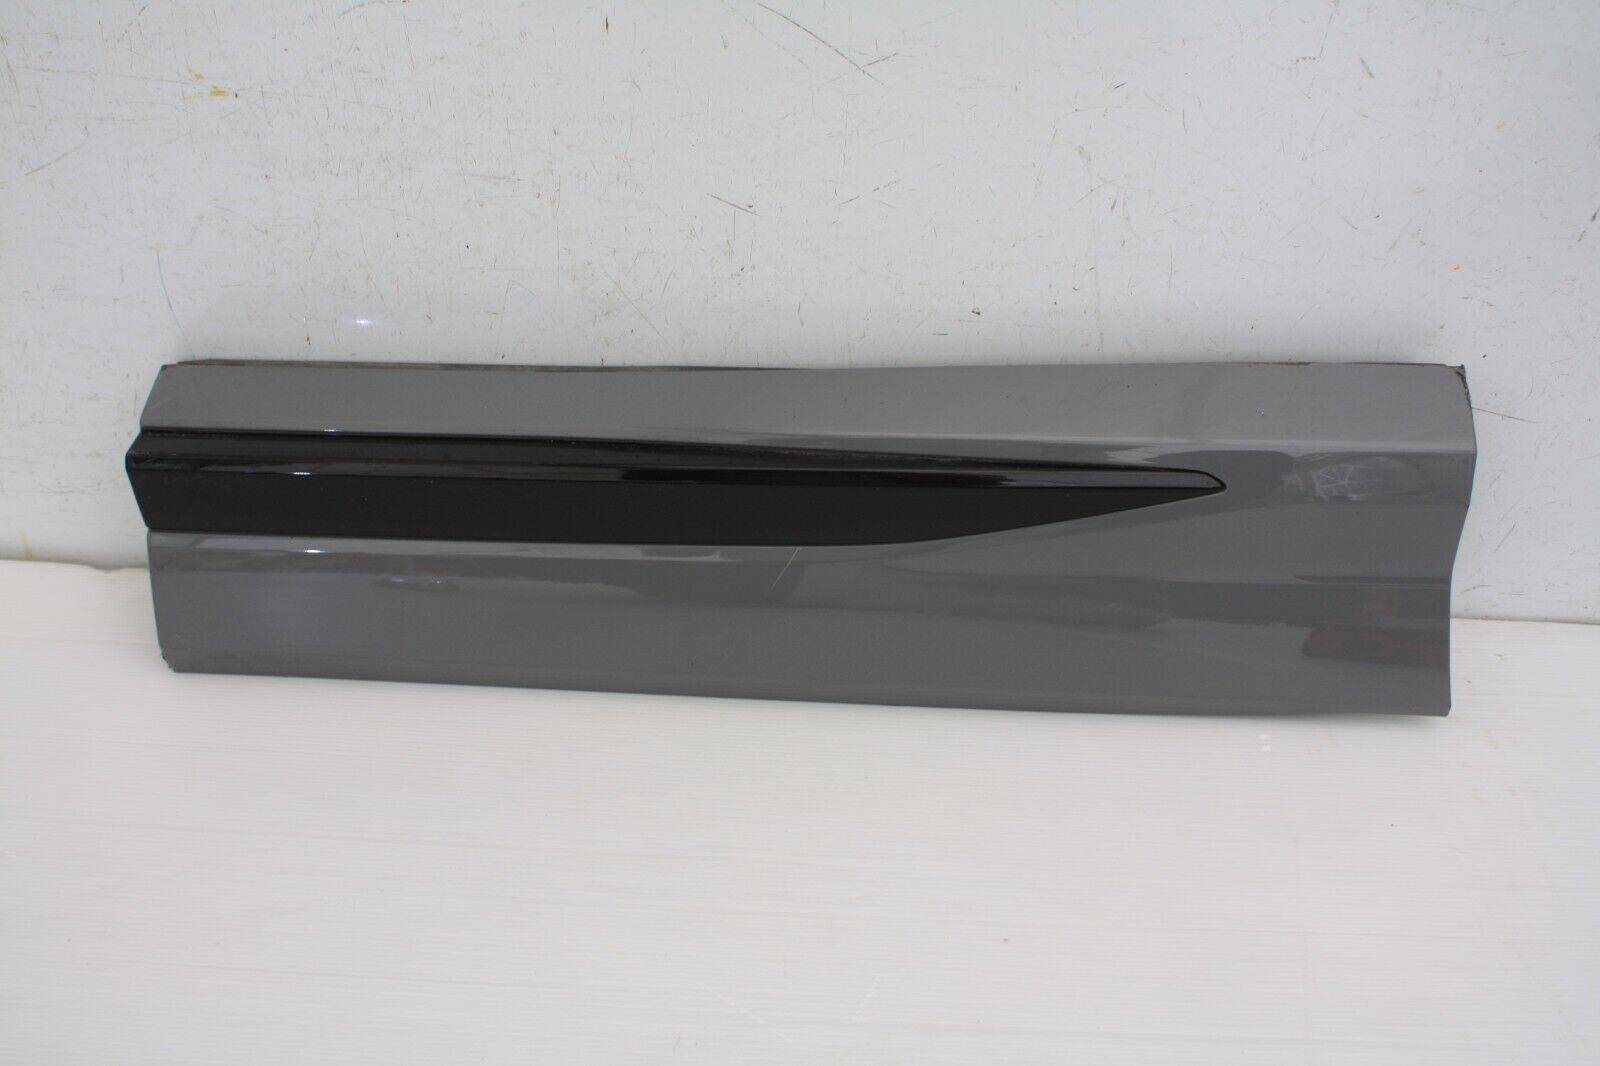 Audi Q3 S Line Rear Right Door Moulding 2018 on 83A853970A Genuine DAMAGED 175783481628